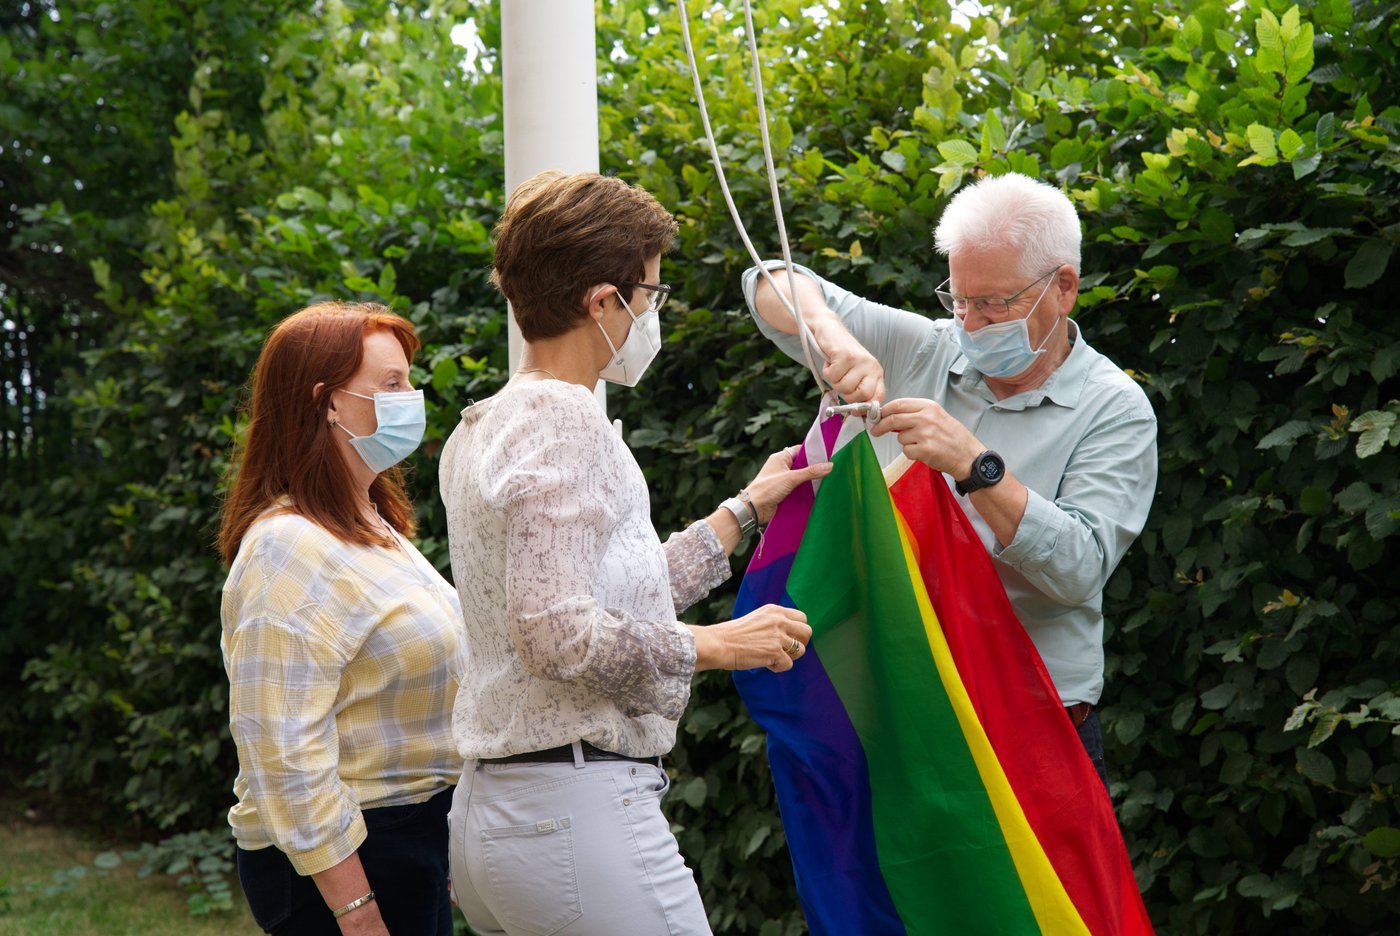 The picture shows three people raising the rainbow flag.